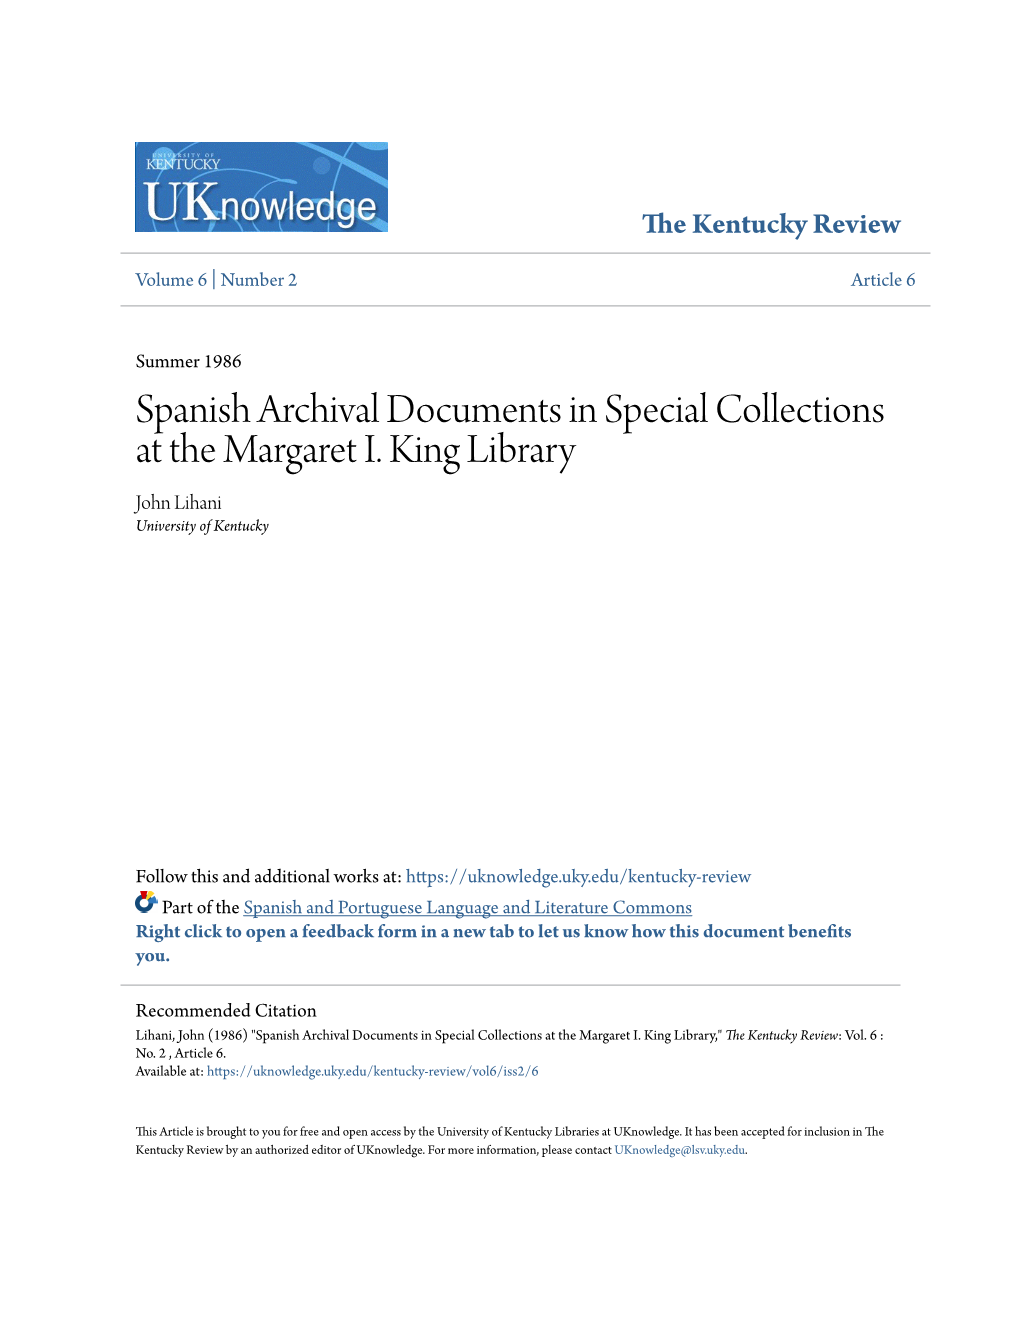 Spanish Archival Documents in Special Collections at the Margaret I